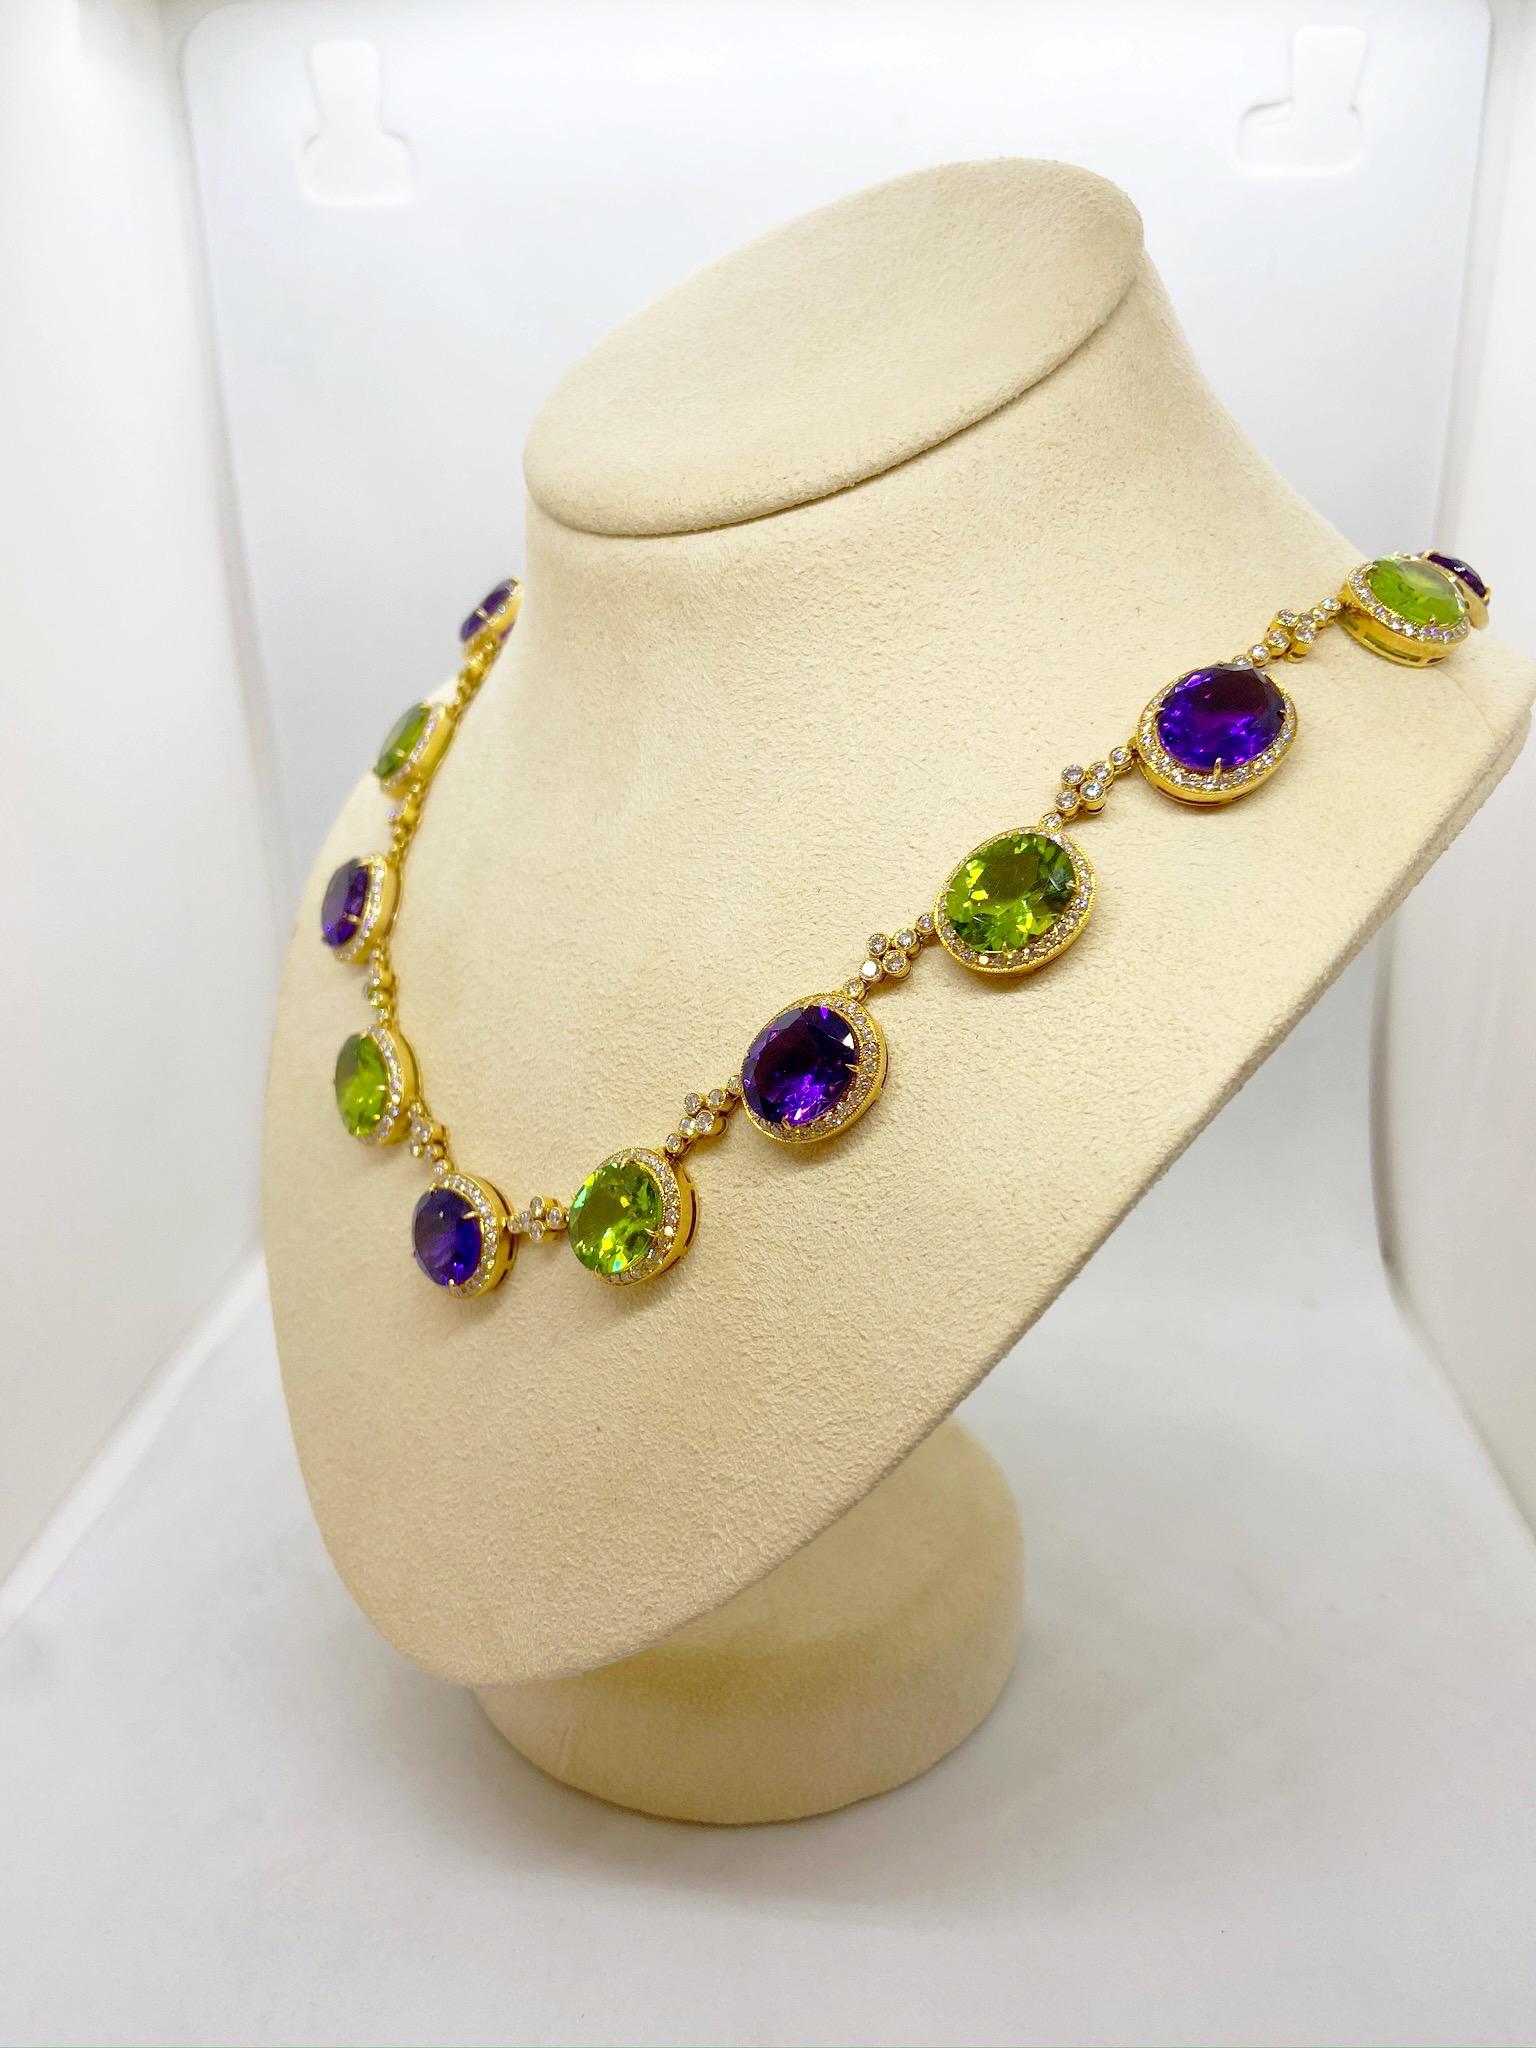 Women's or Men's 18KT YG Necklace with Diamond 8.25CT's, Amethyst 32.54Ct., Peridot 37.07Ct. For Sale